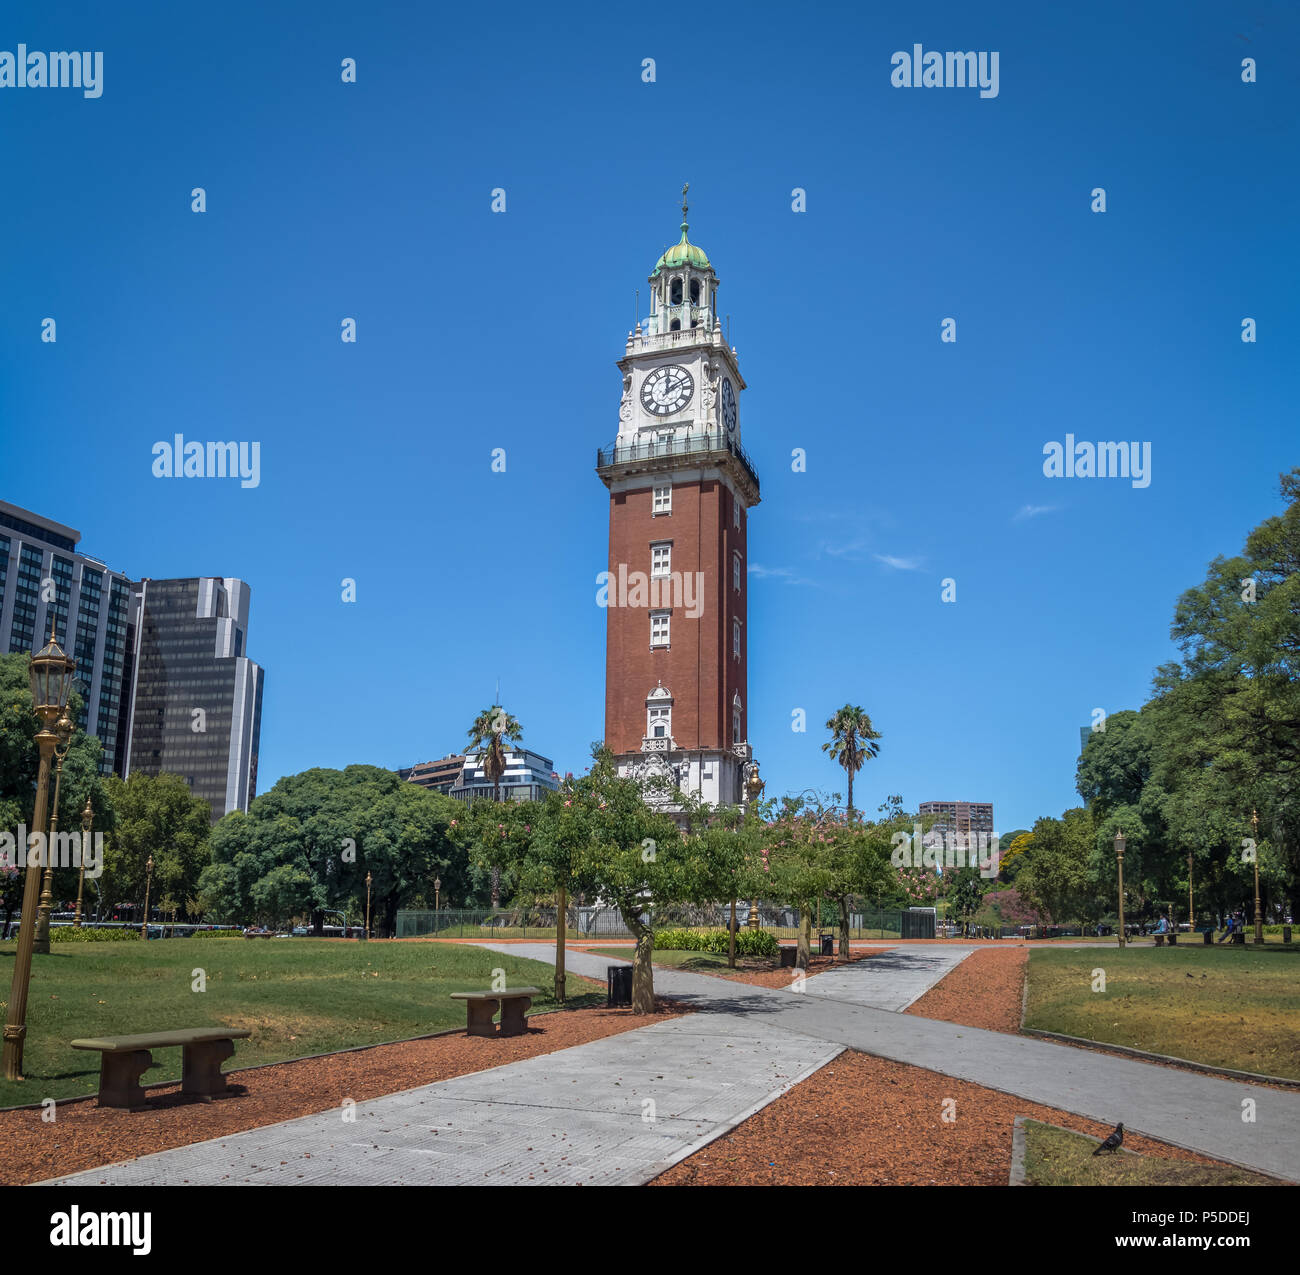 Torre Monumental or Torre de los Ingleses (Tower of the English), famous clock tower in Retiro - Buenos Aires, Argentina Stock Photo